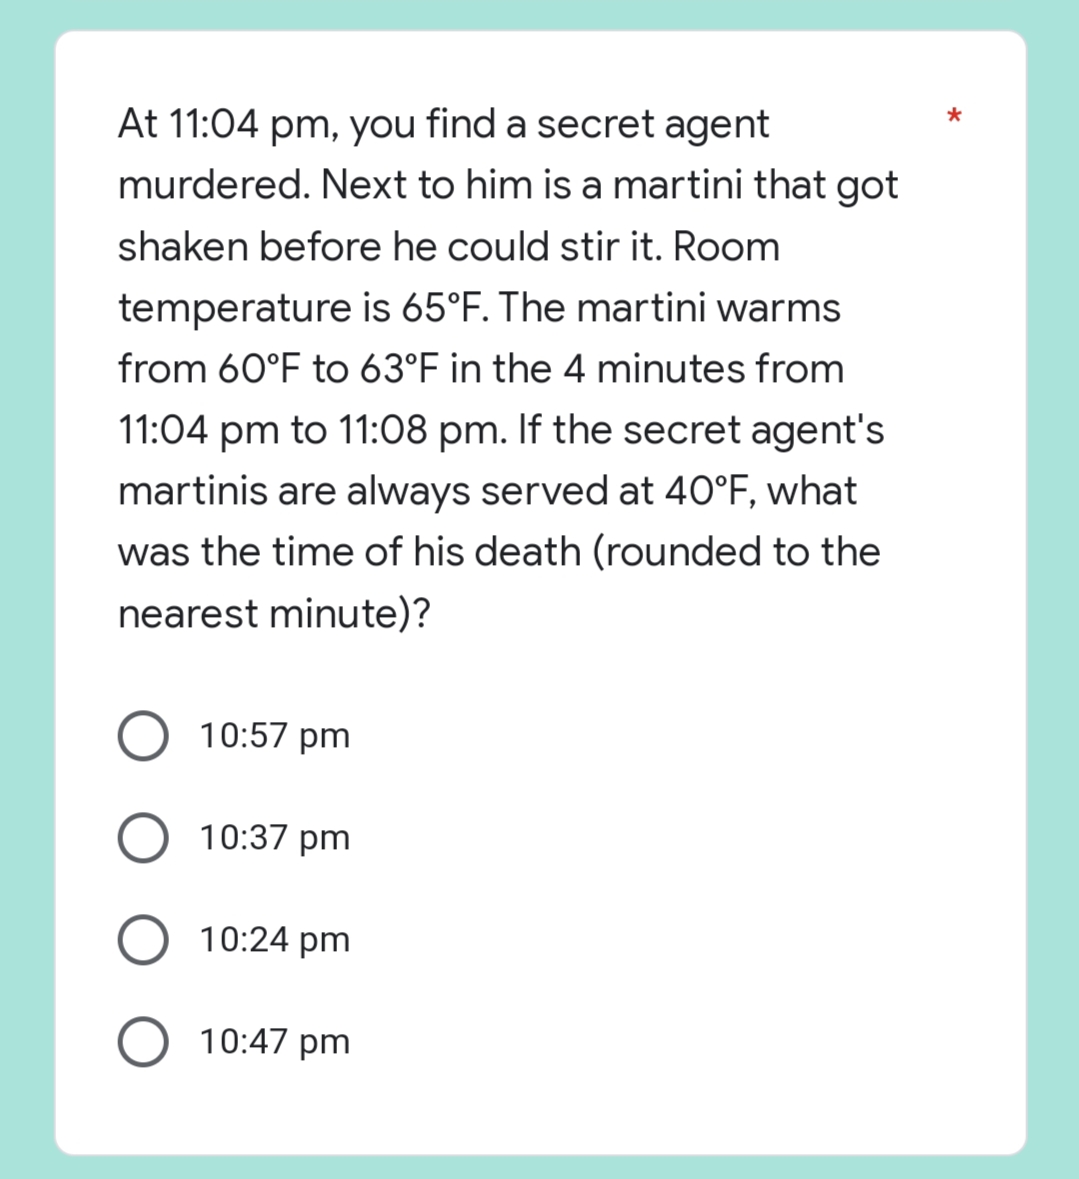 *
At 11:04 pm, you find a secret agent
murdered. Next to him is a martini that got
shaken before he could stir it. Room
temperature is 65°F. The martini warms
from 60°F to 63°F in the 4 minutes from
11:04 pm to 11:08 pm. If the secret agent's
martinis are always served at 40°F, what
was the time of his death (rounded to the
nearest minute)?
10:57 pm
O 10:37 pm
10:24 pm
O 10:47 pm